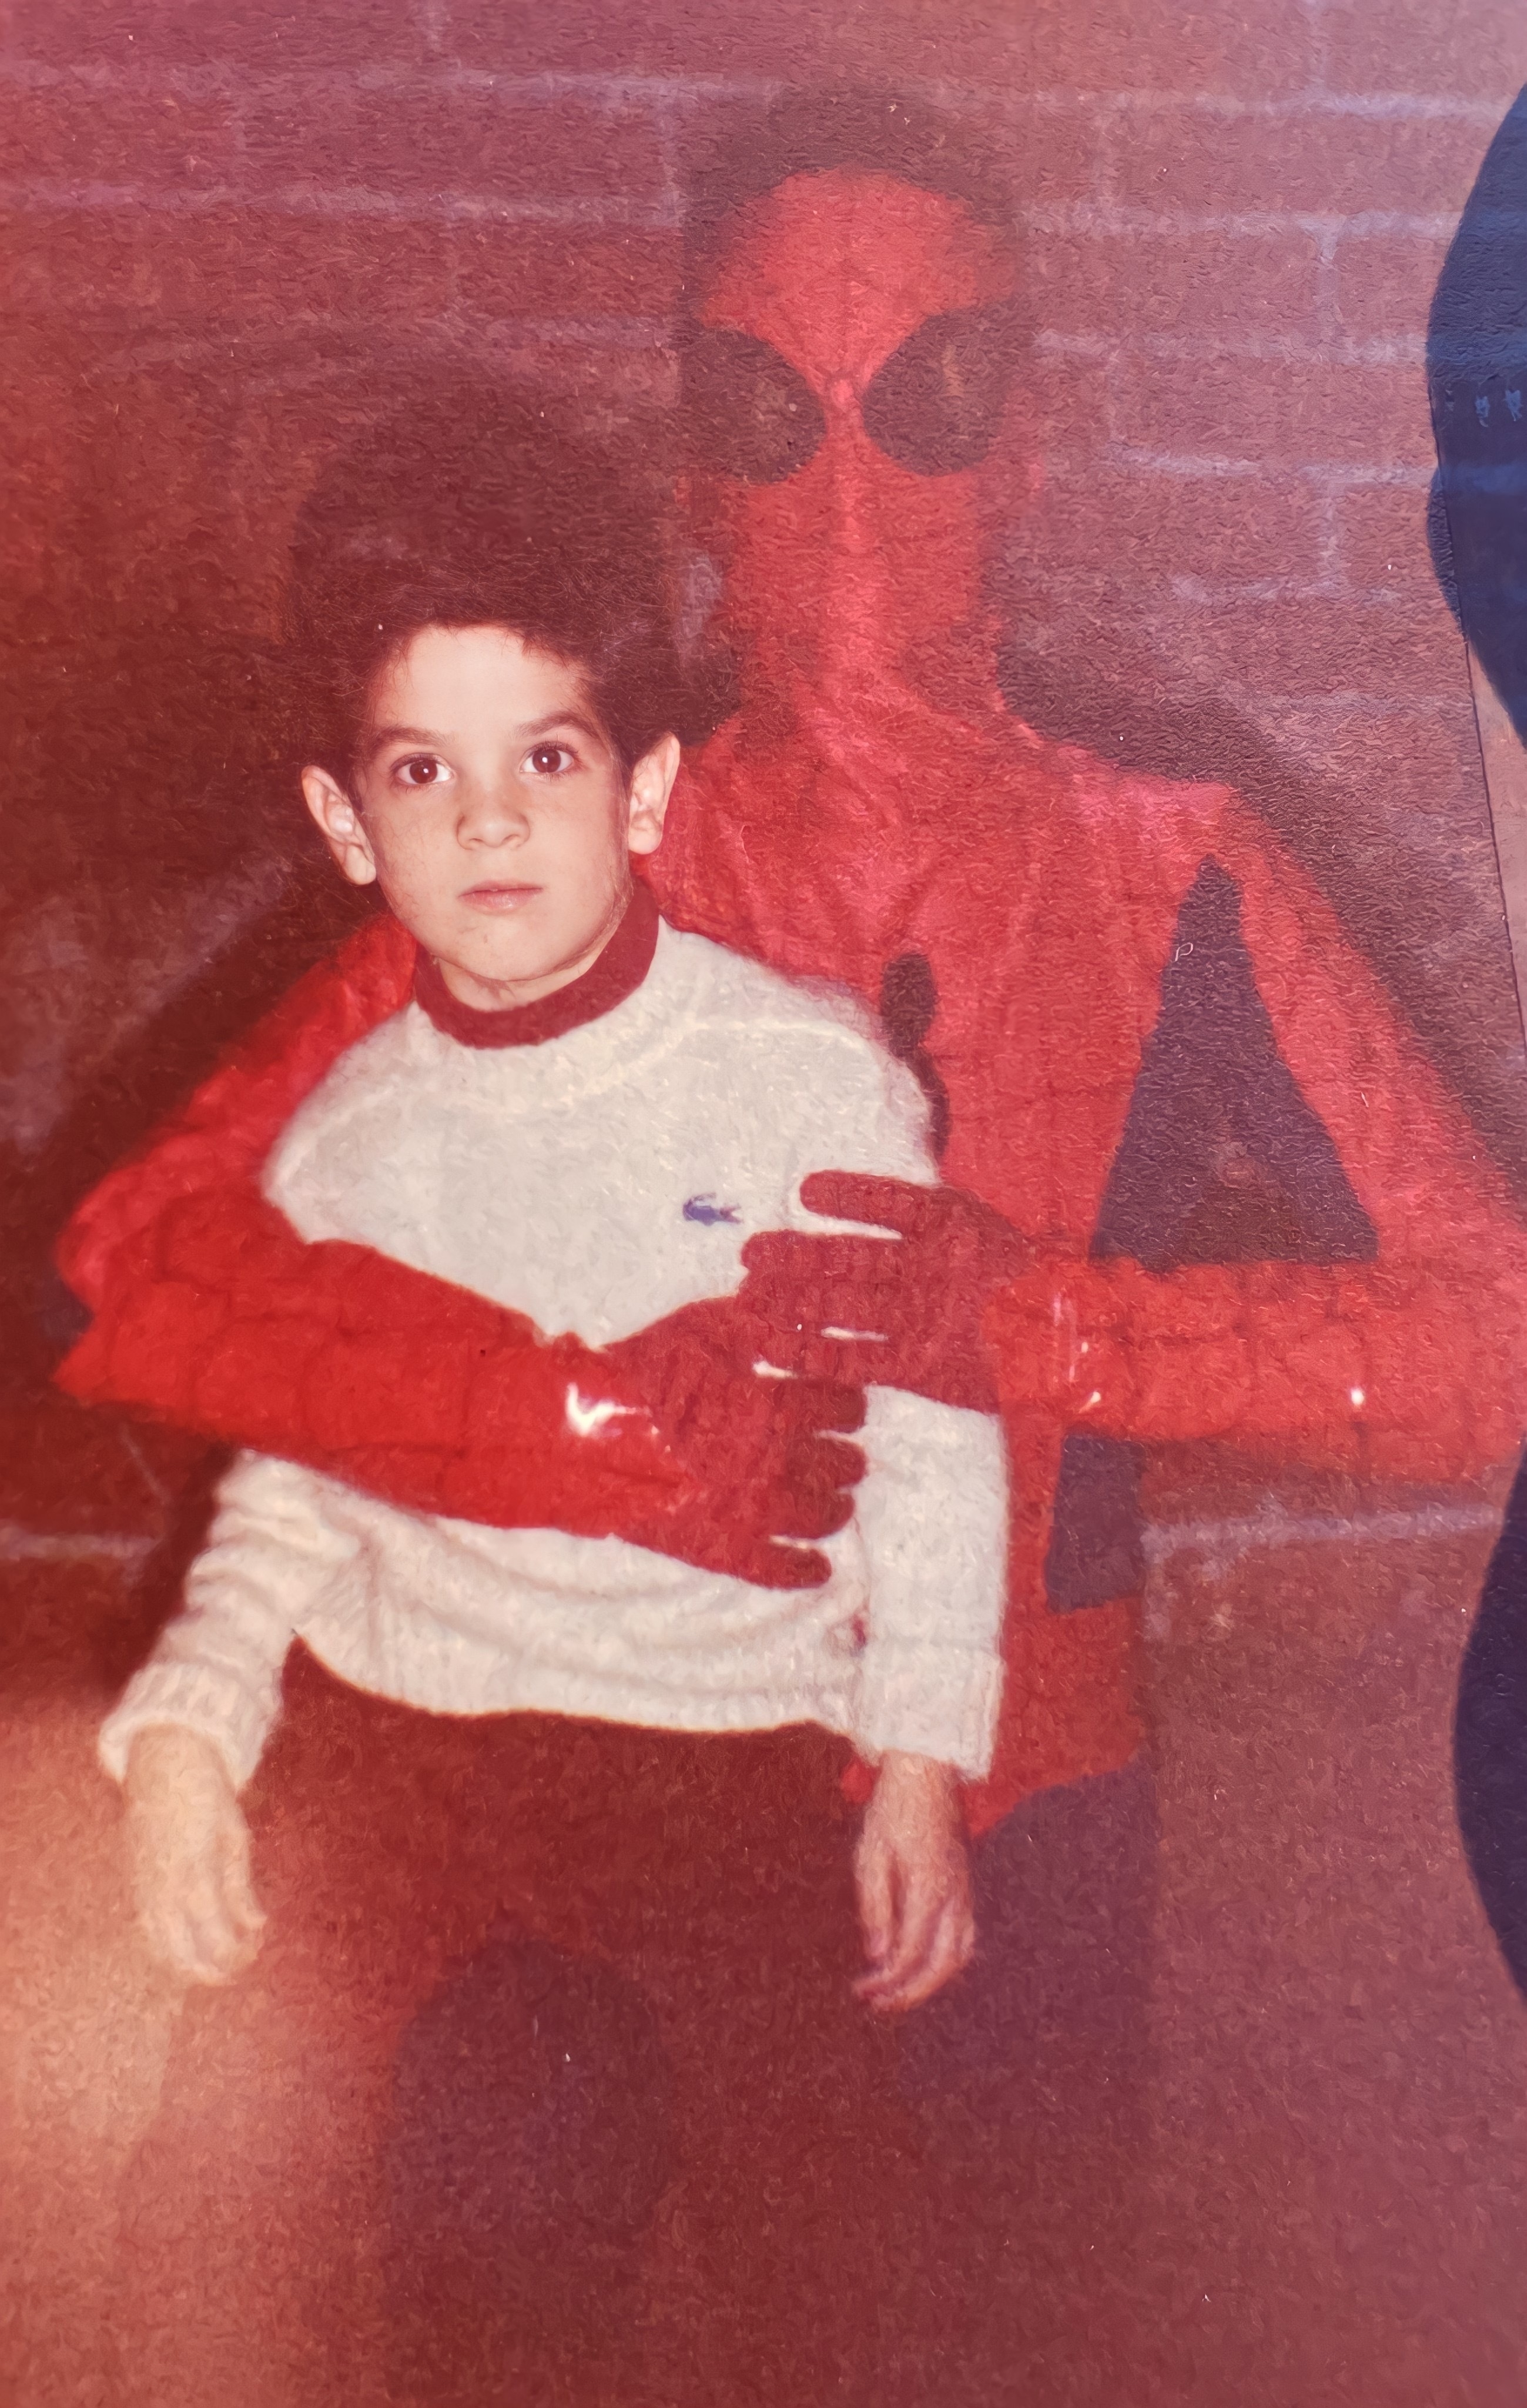 Child in a white sweater with a person dressed as Spider-Man. Vintage photo aesthetic, evoking nostalgia